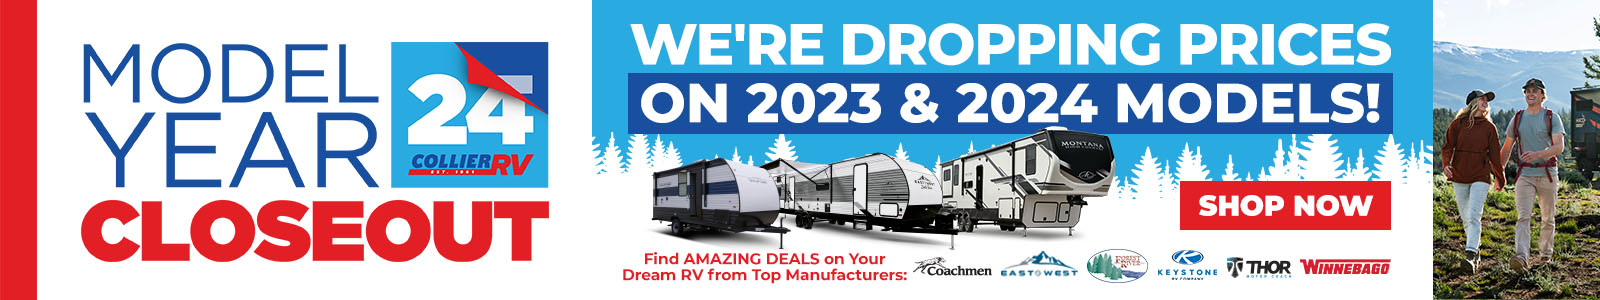 Model Year Closeout: We're Dropping Prices on 2023 & 2024 Models!